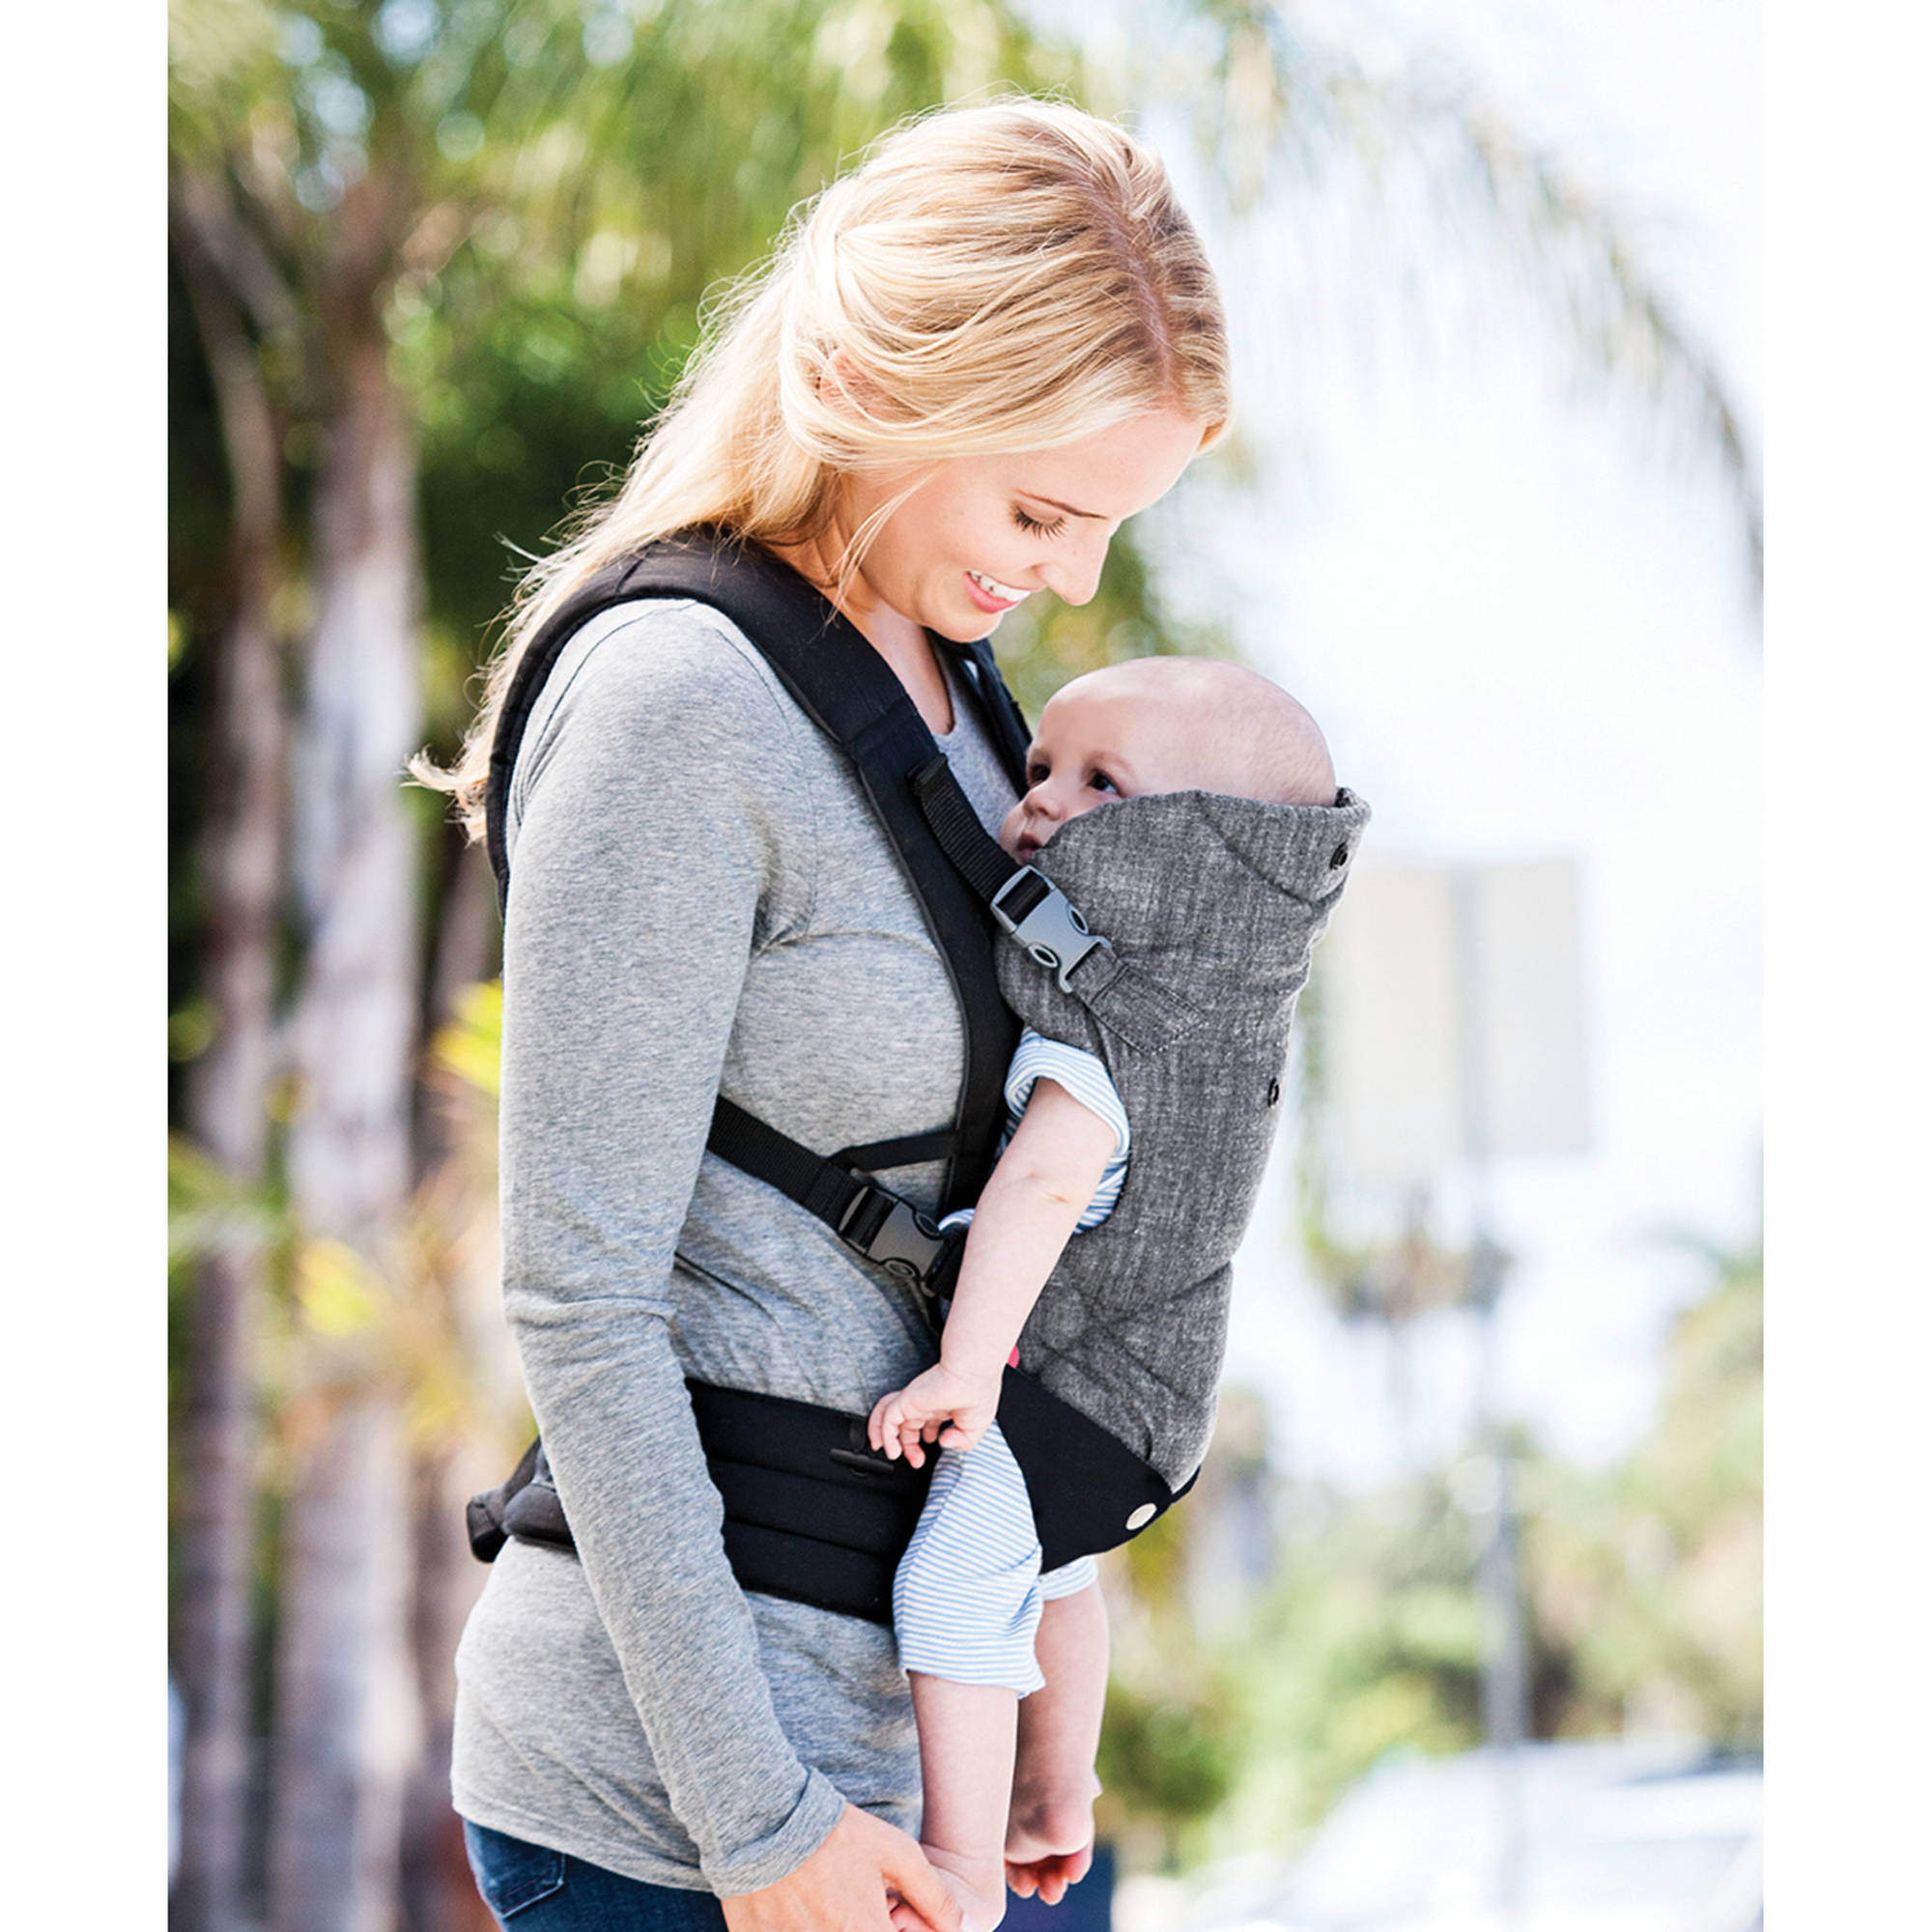 Infantino Fusion Carrier-Black - image 2 of 4